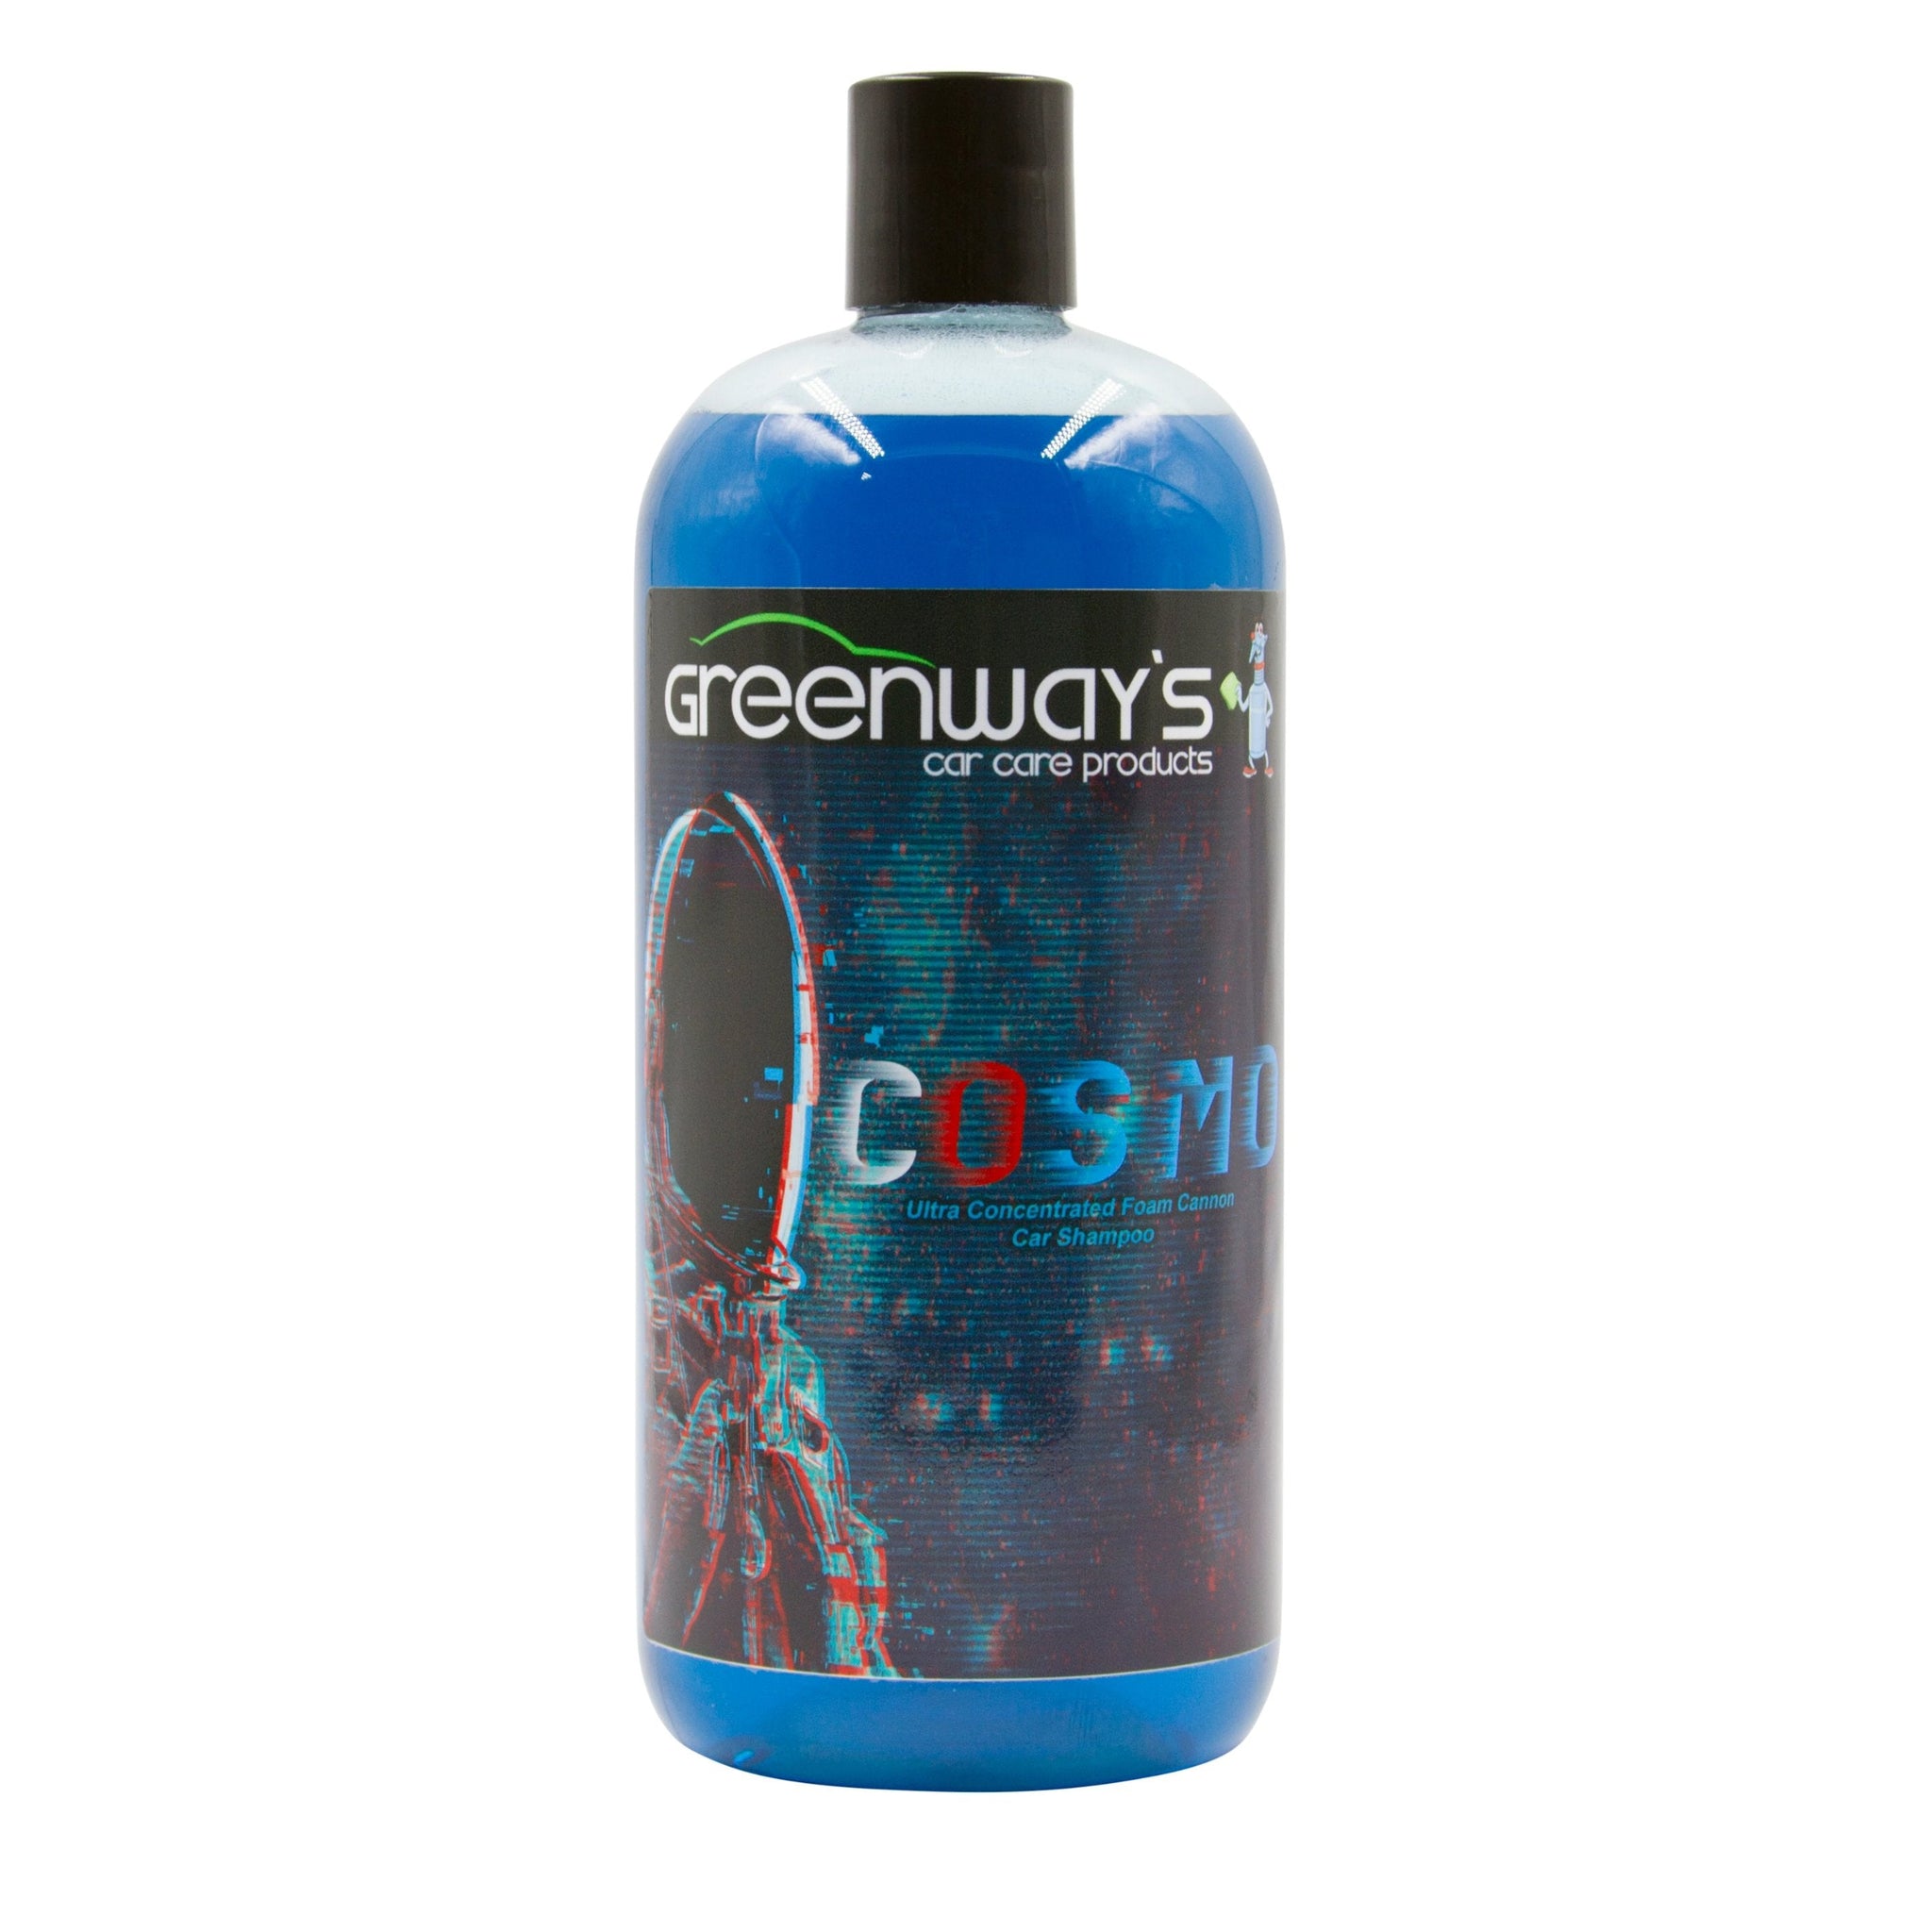 Greenway’s Car Care Products, Cosmo, ultra-concentrated, pH neutral, low or high-pressure foam cannon car shampoo, 32 ounces.